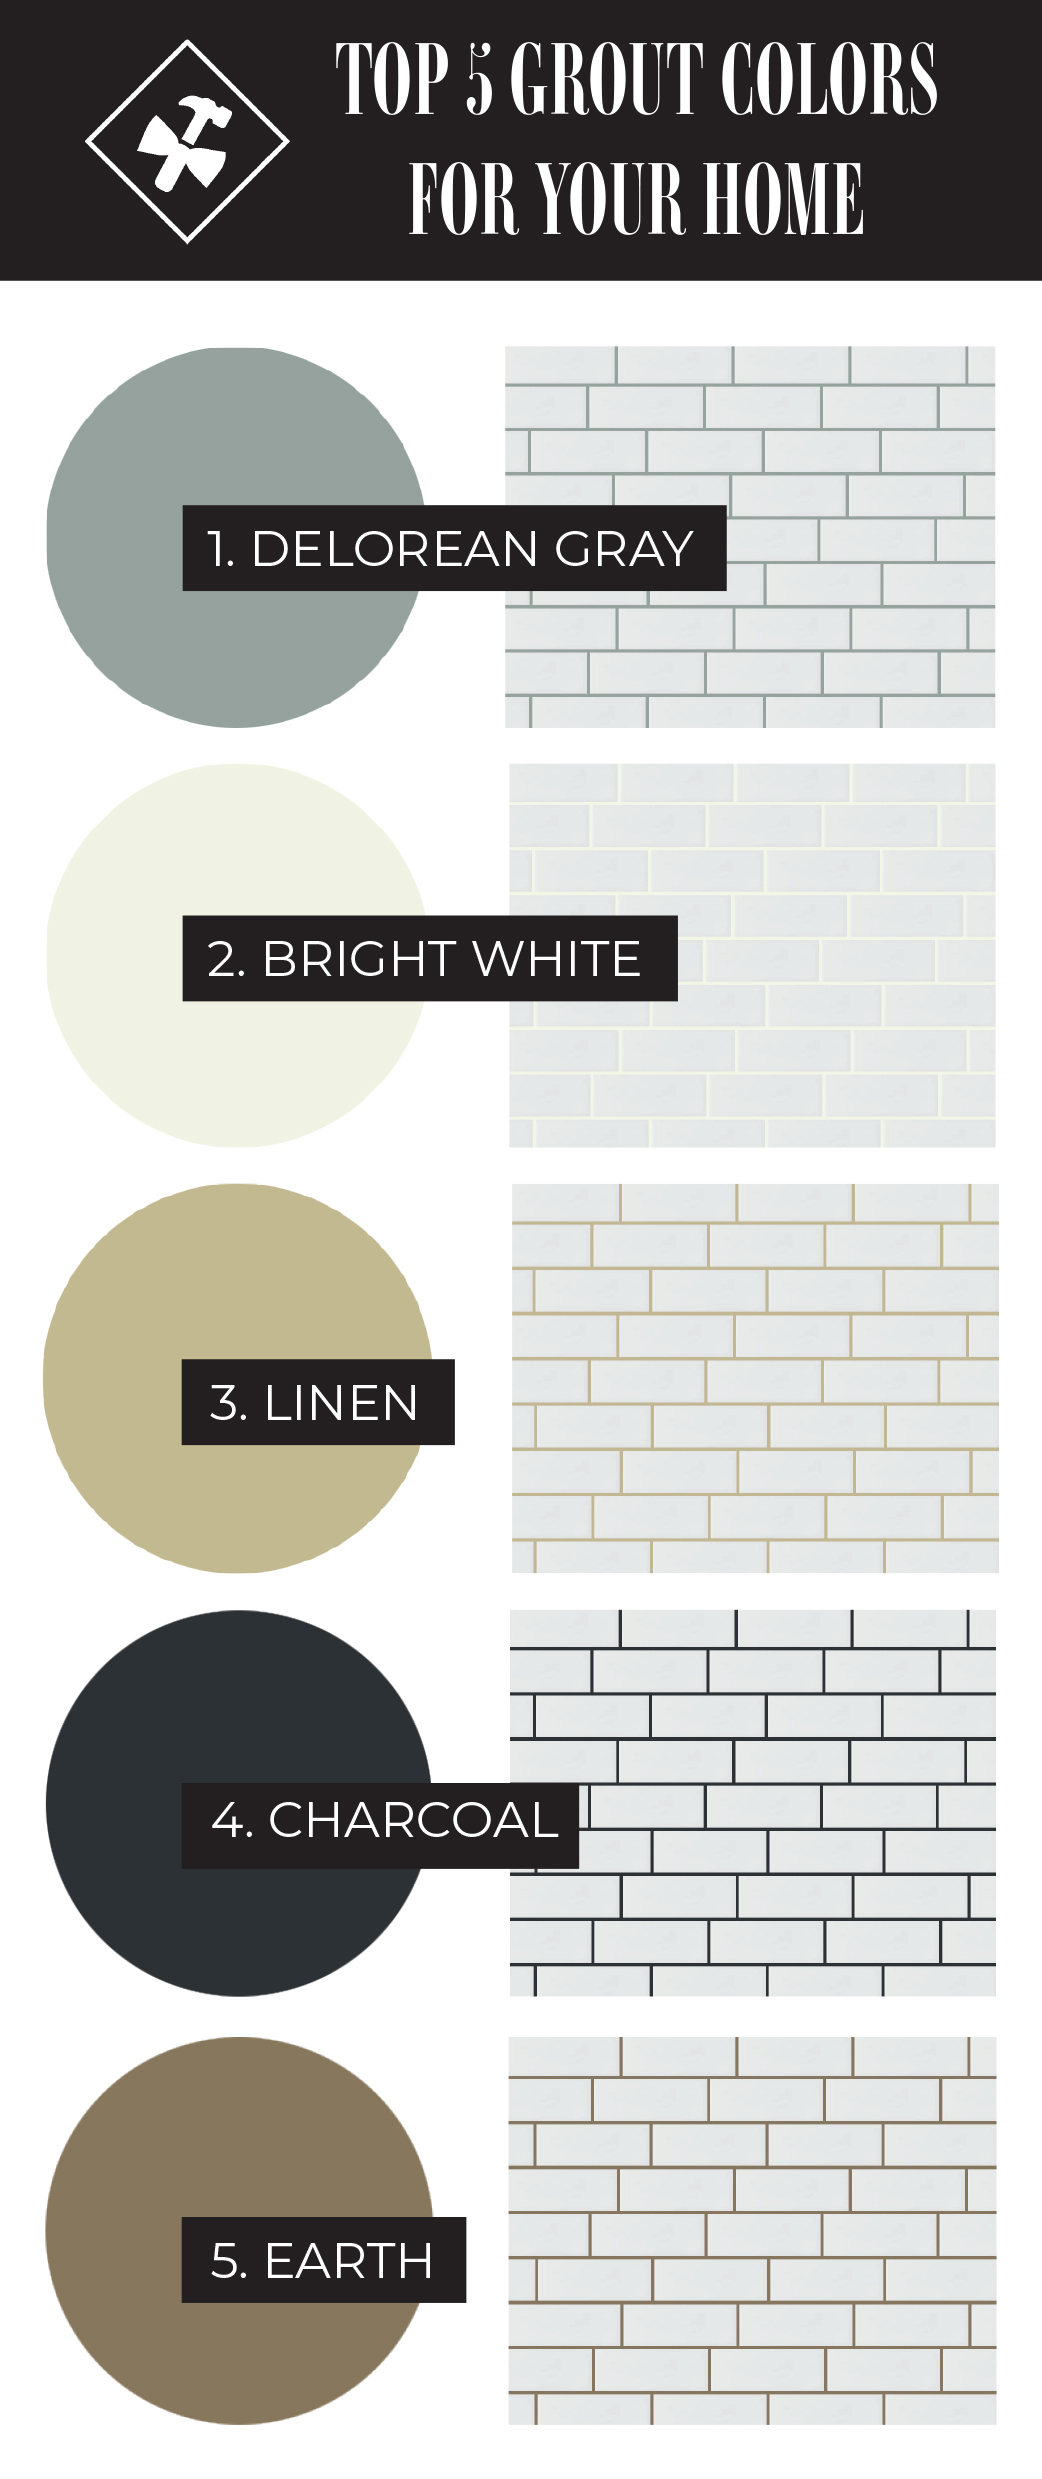 Top 5 Grout Colors For Your Home | construction2style